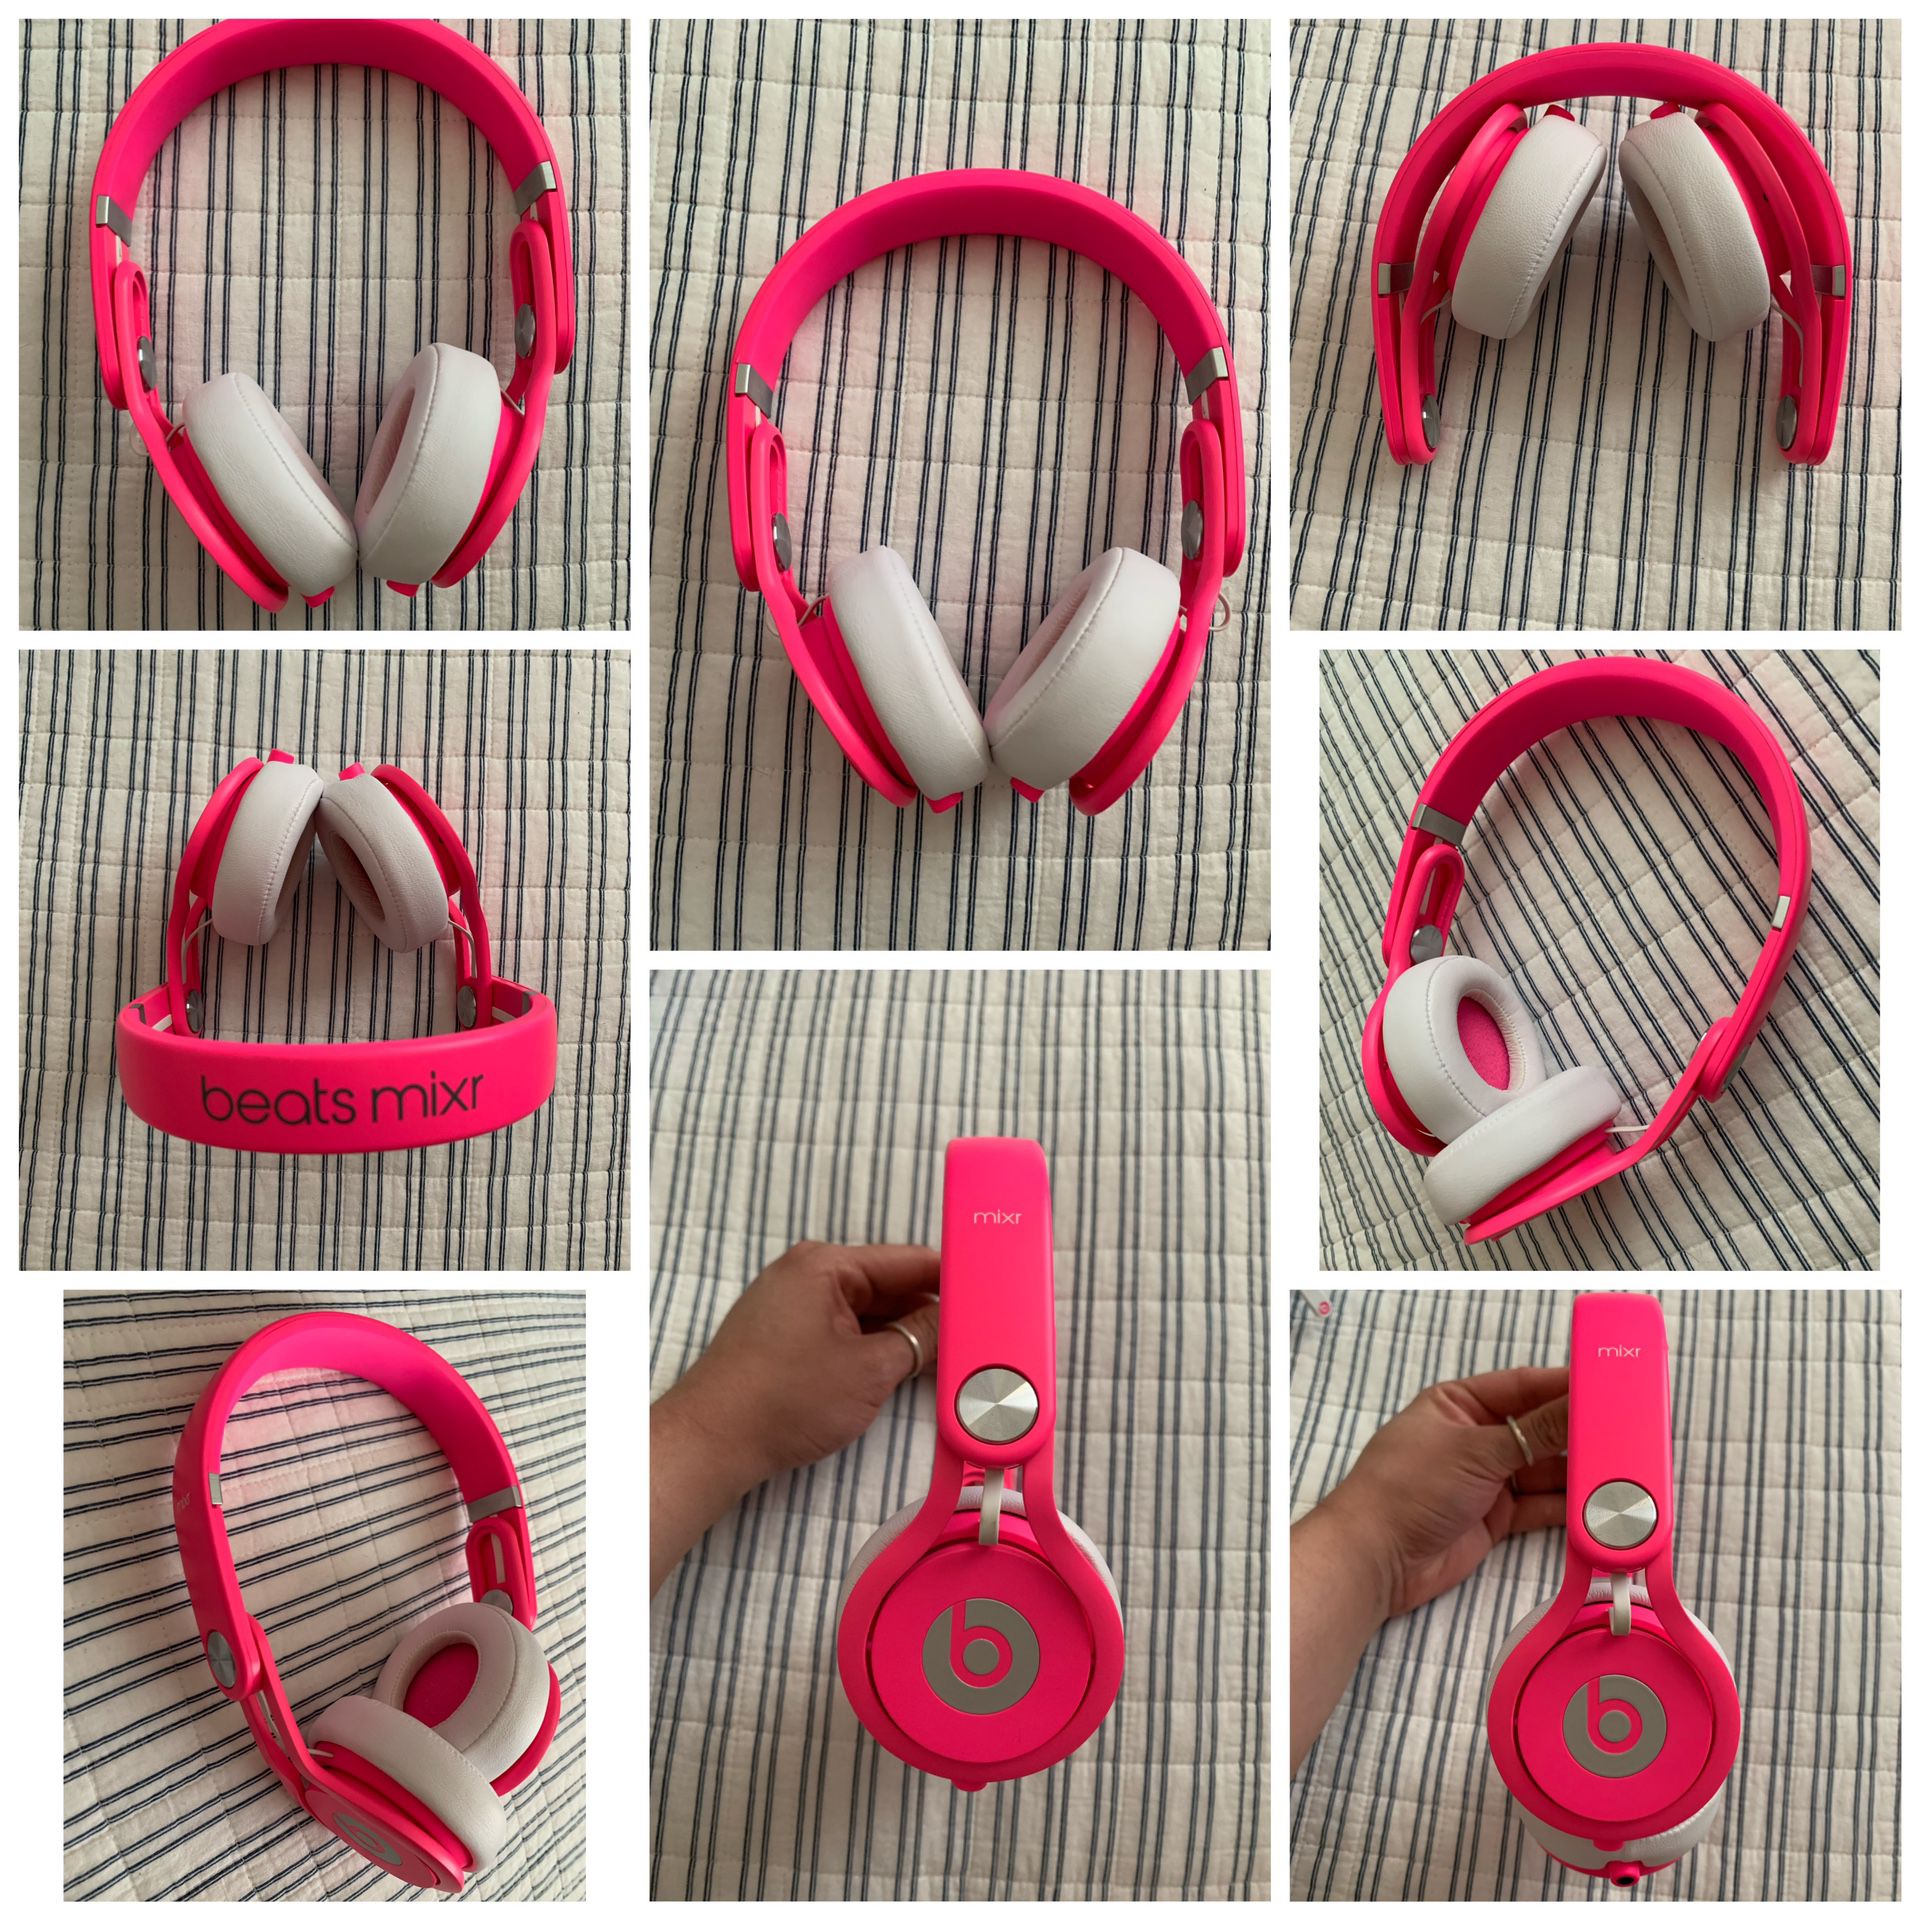 Beats by Dre Mixr Headphones (Neon Pink) for Charity!